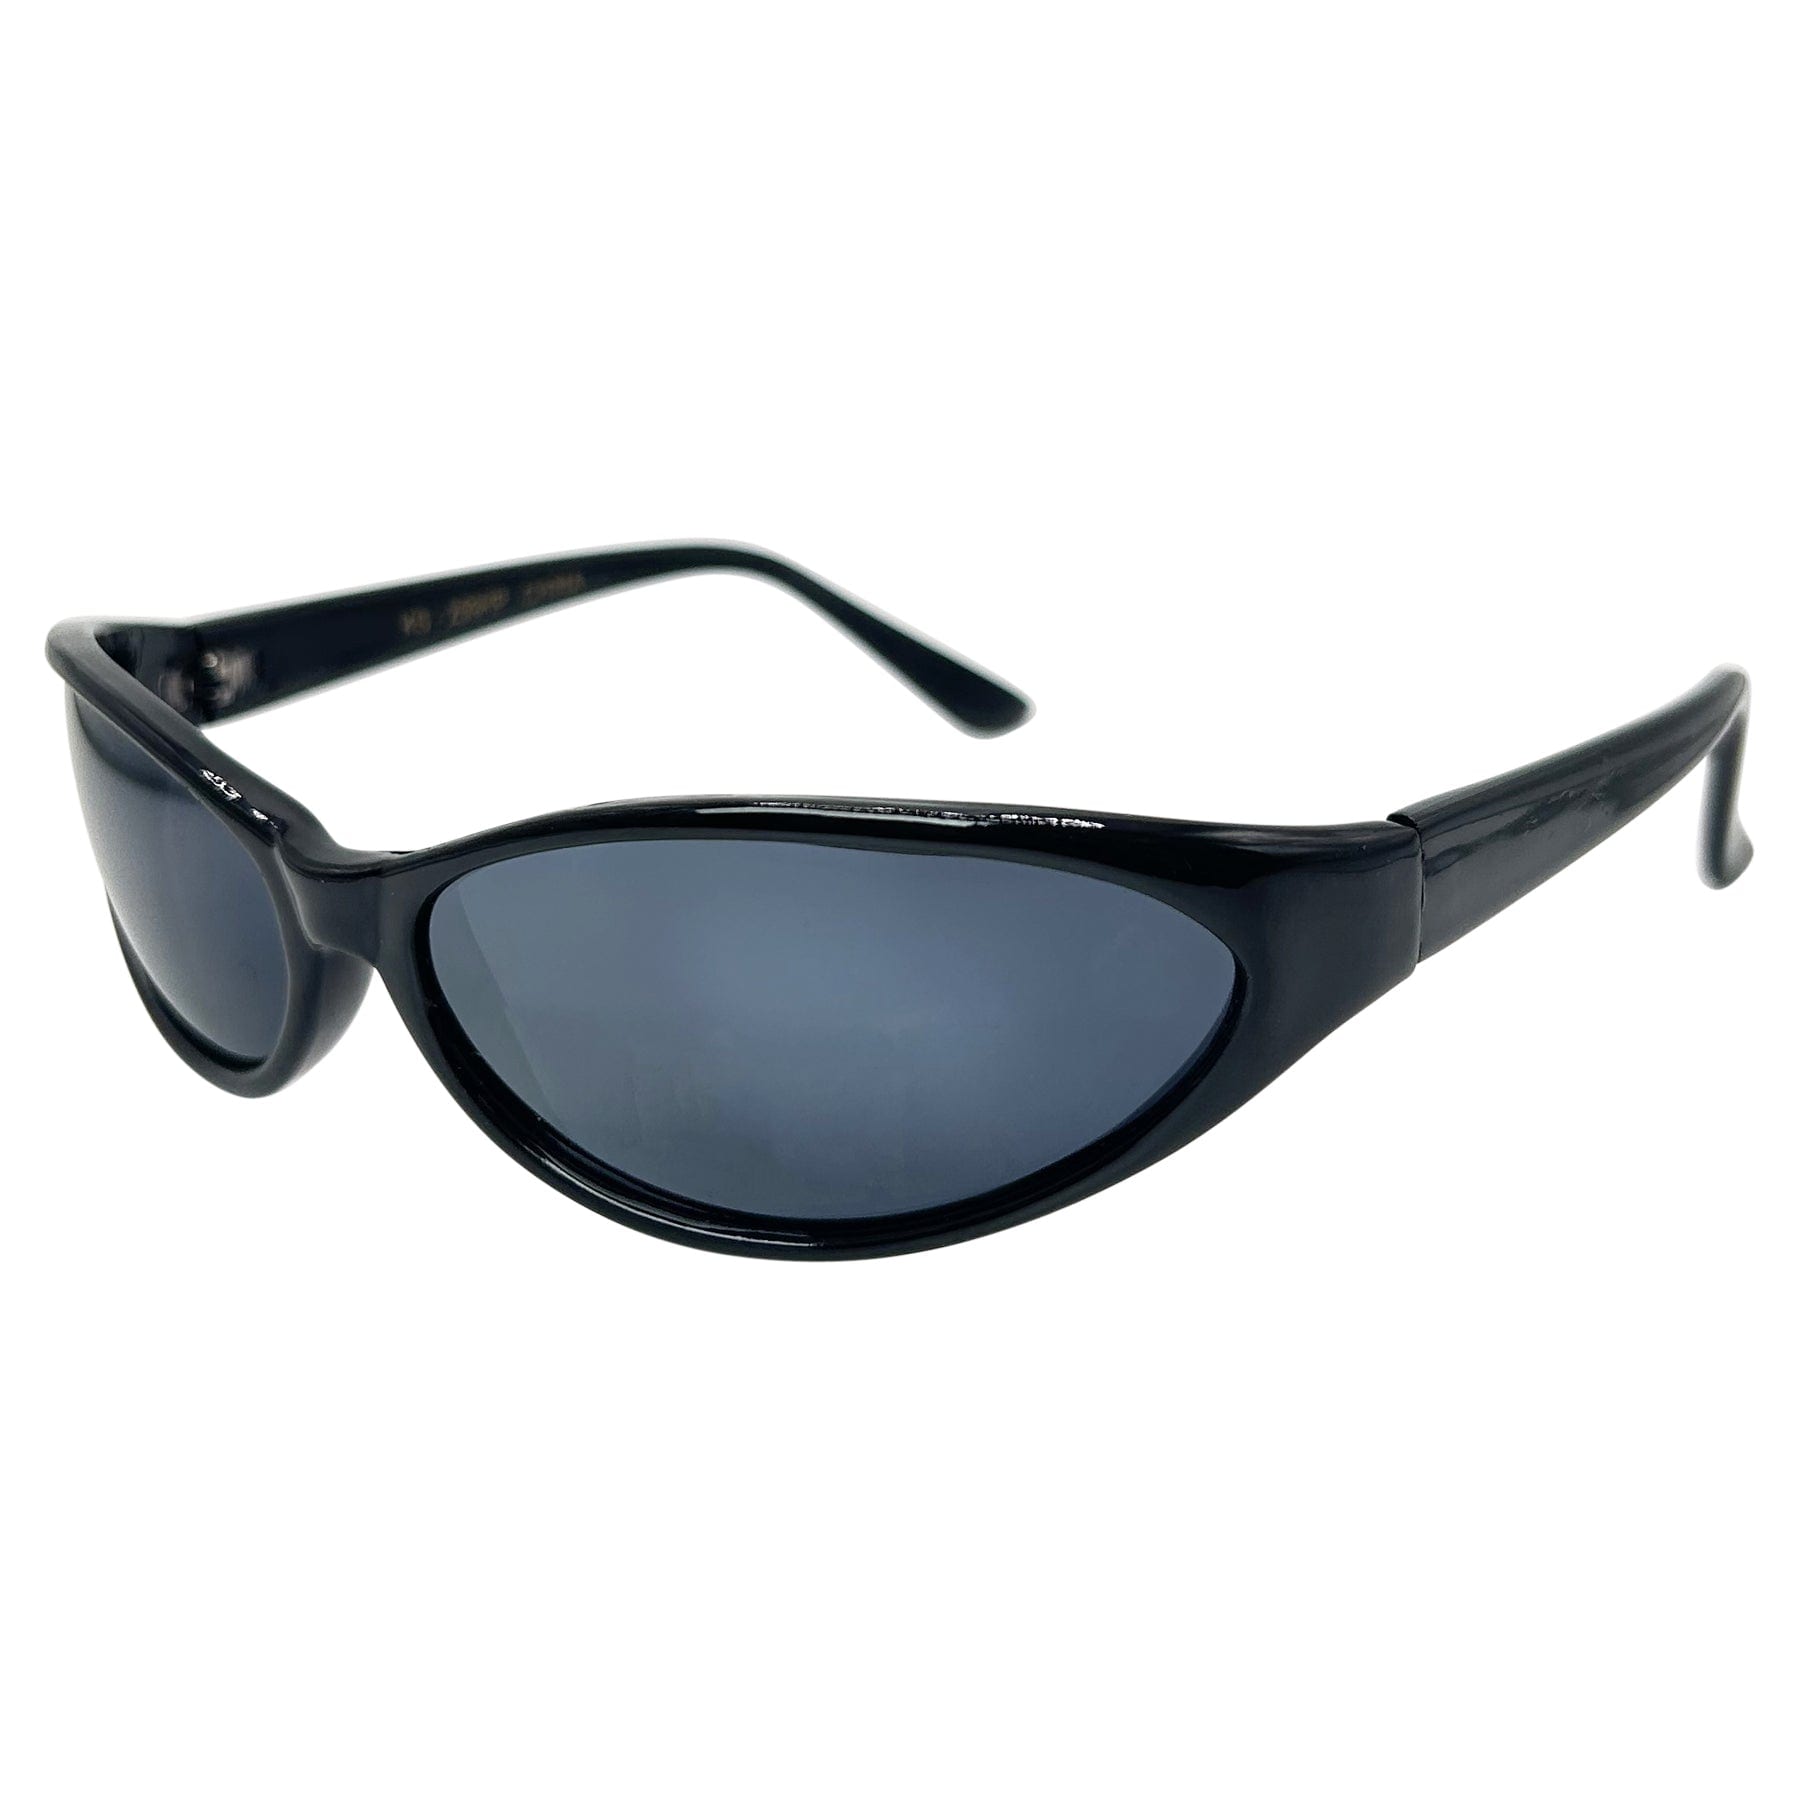 unisex and mens black sunglasses with a 90s style frame